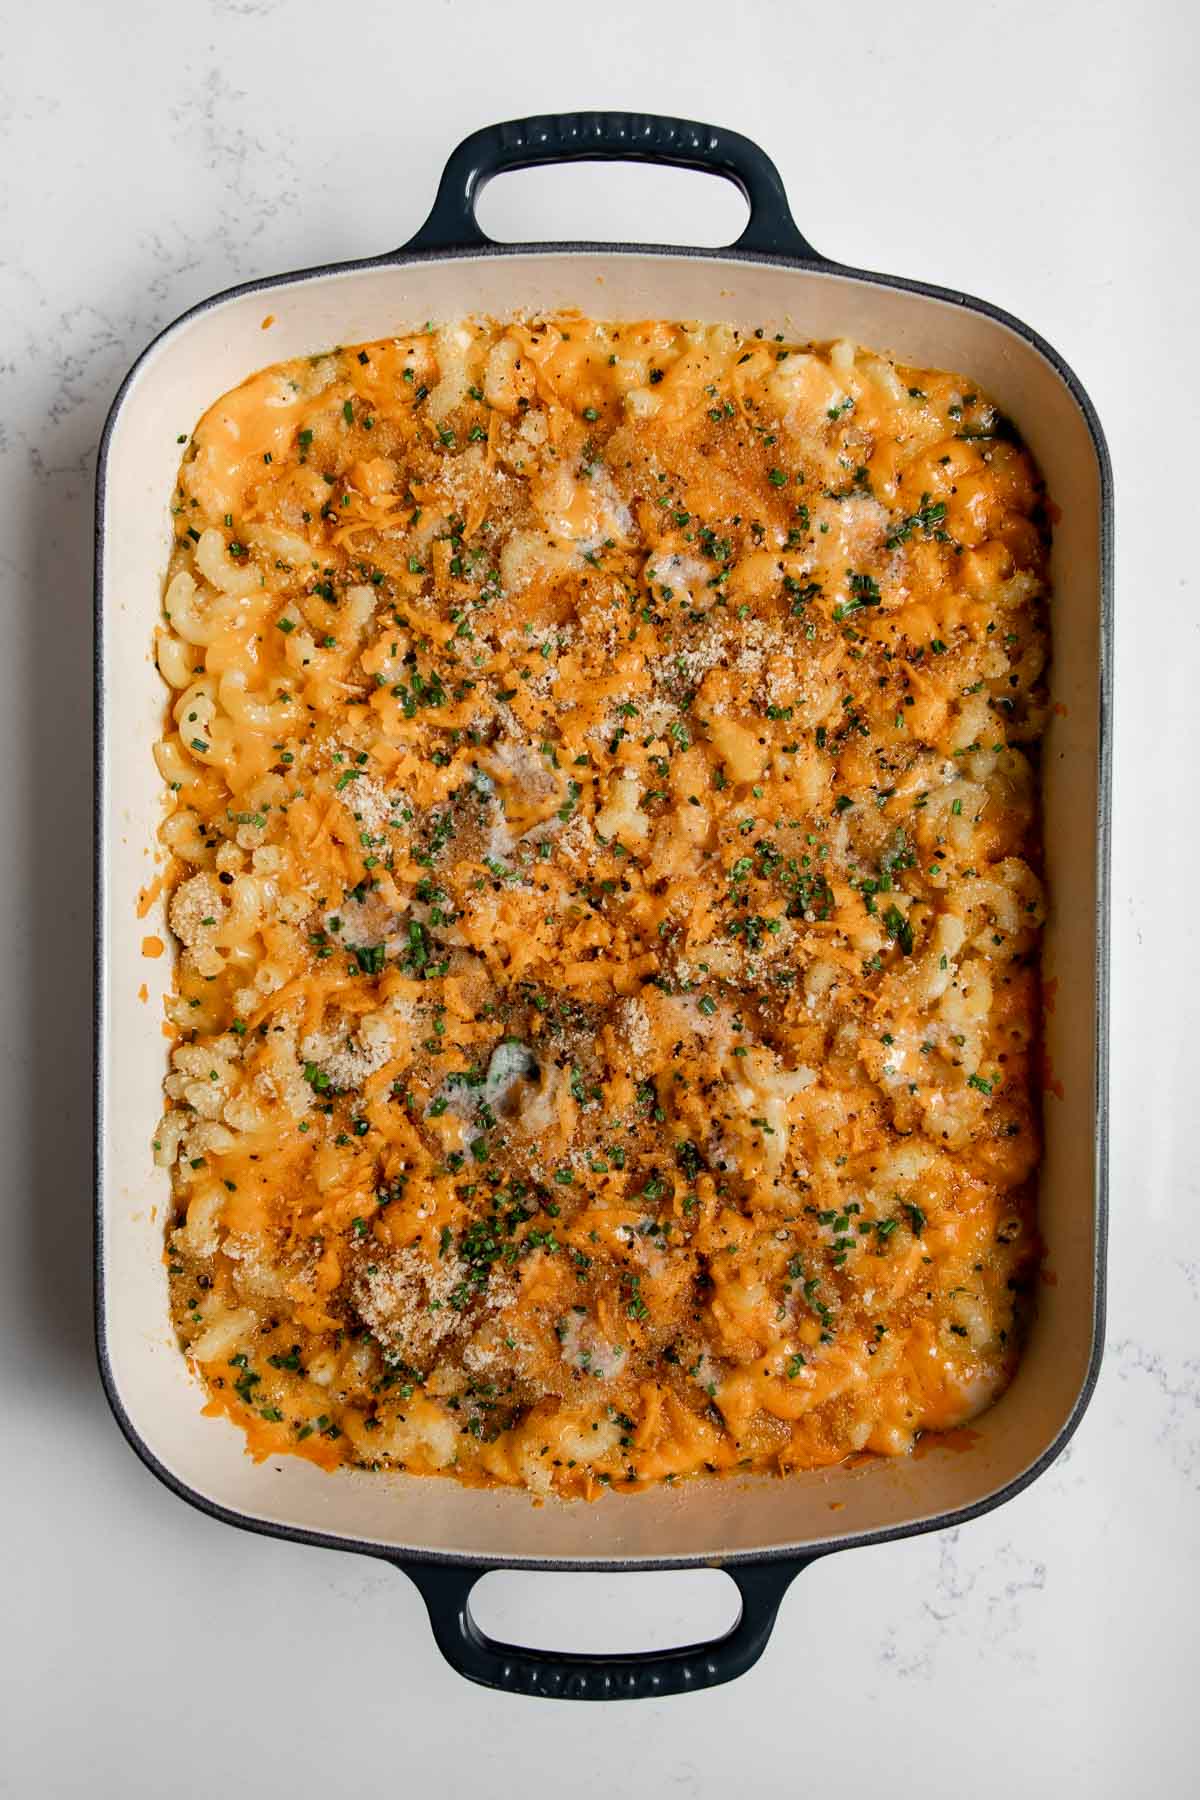 macaroni and cheese in a cast-iron pan out of the oven baked with cheese.